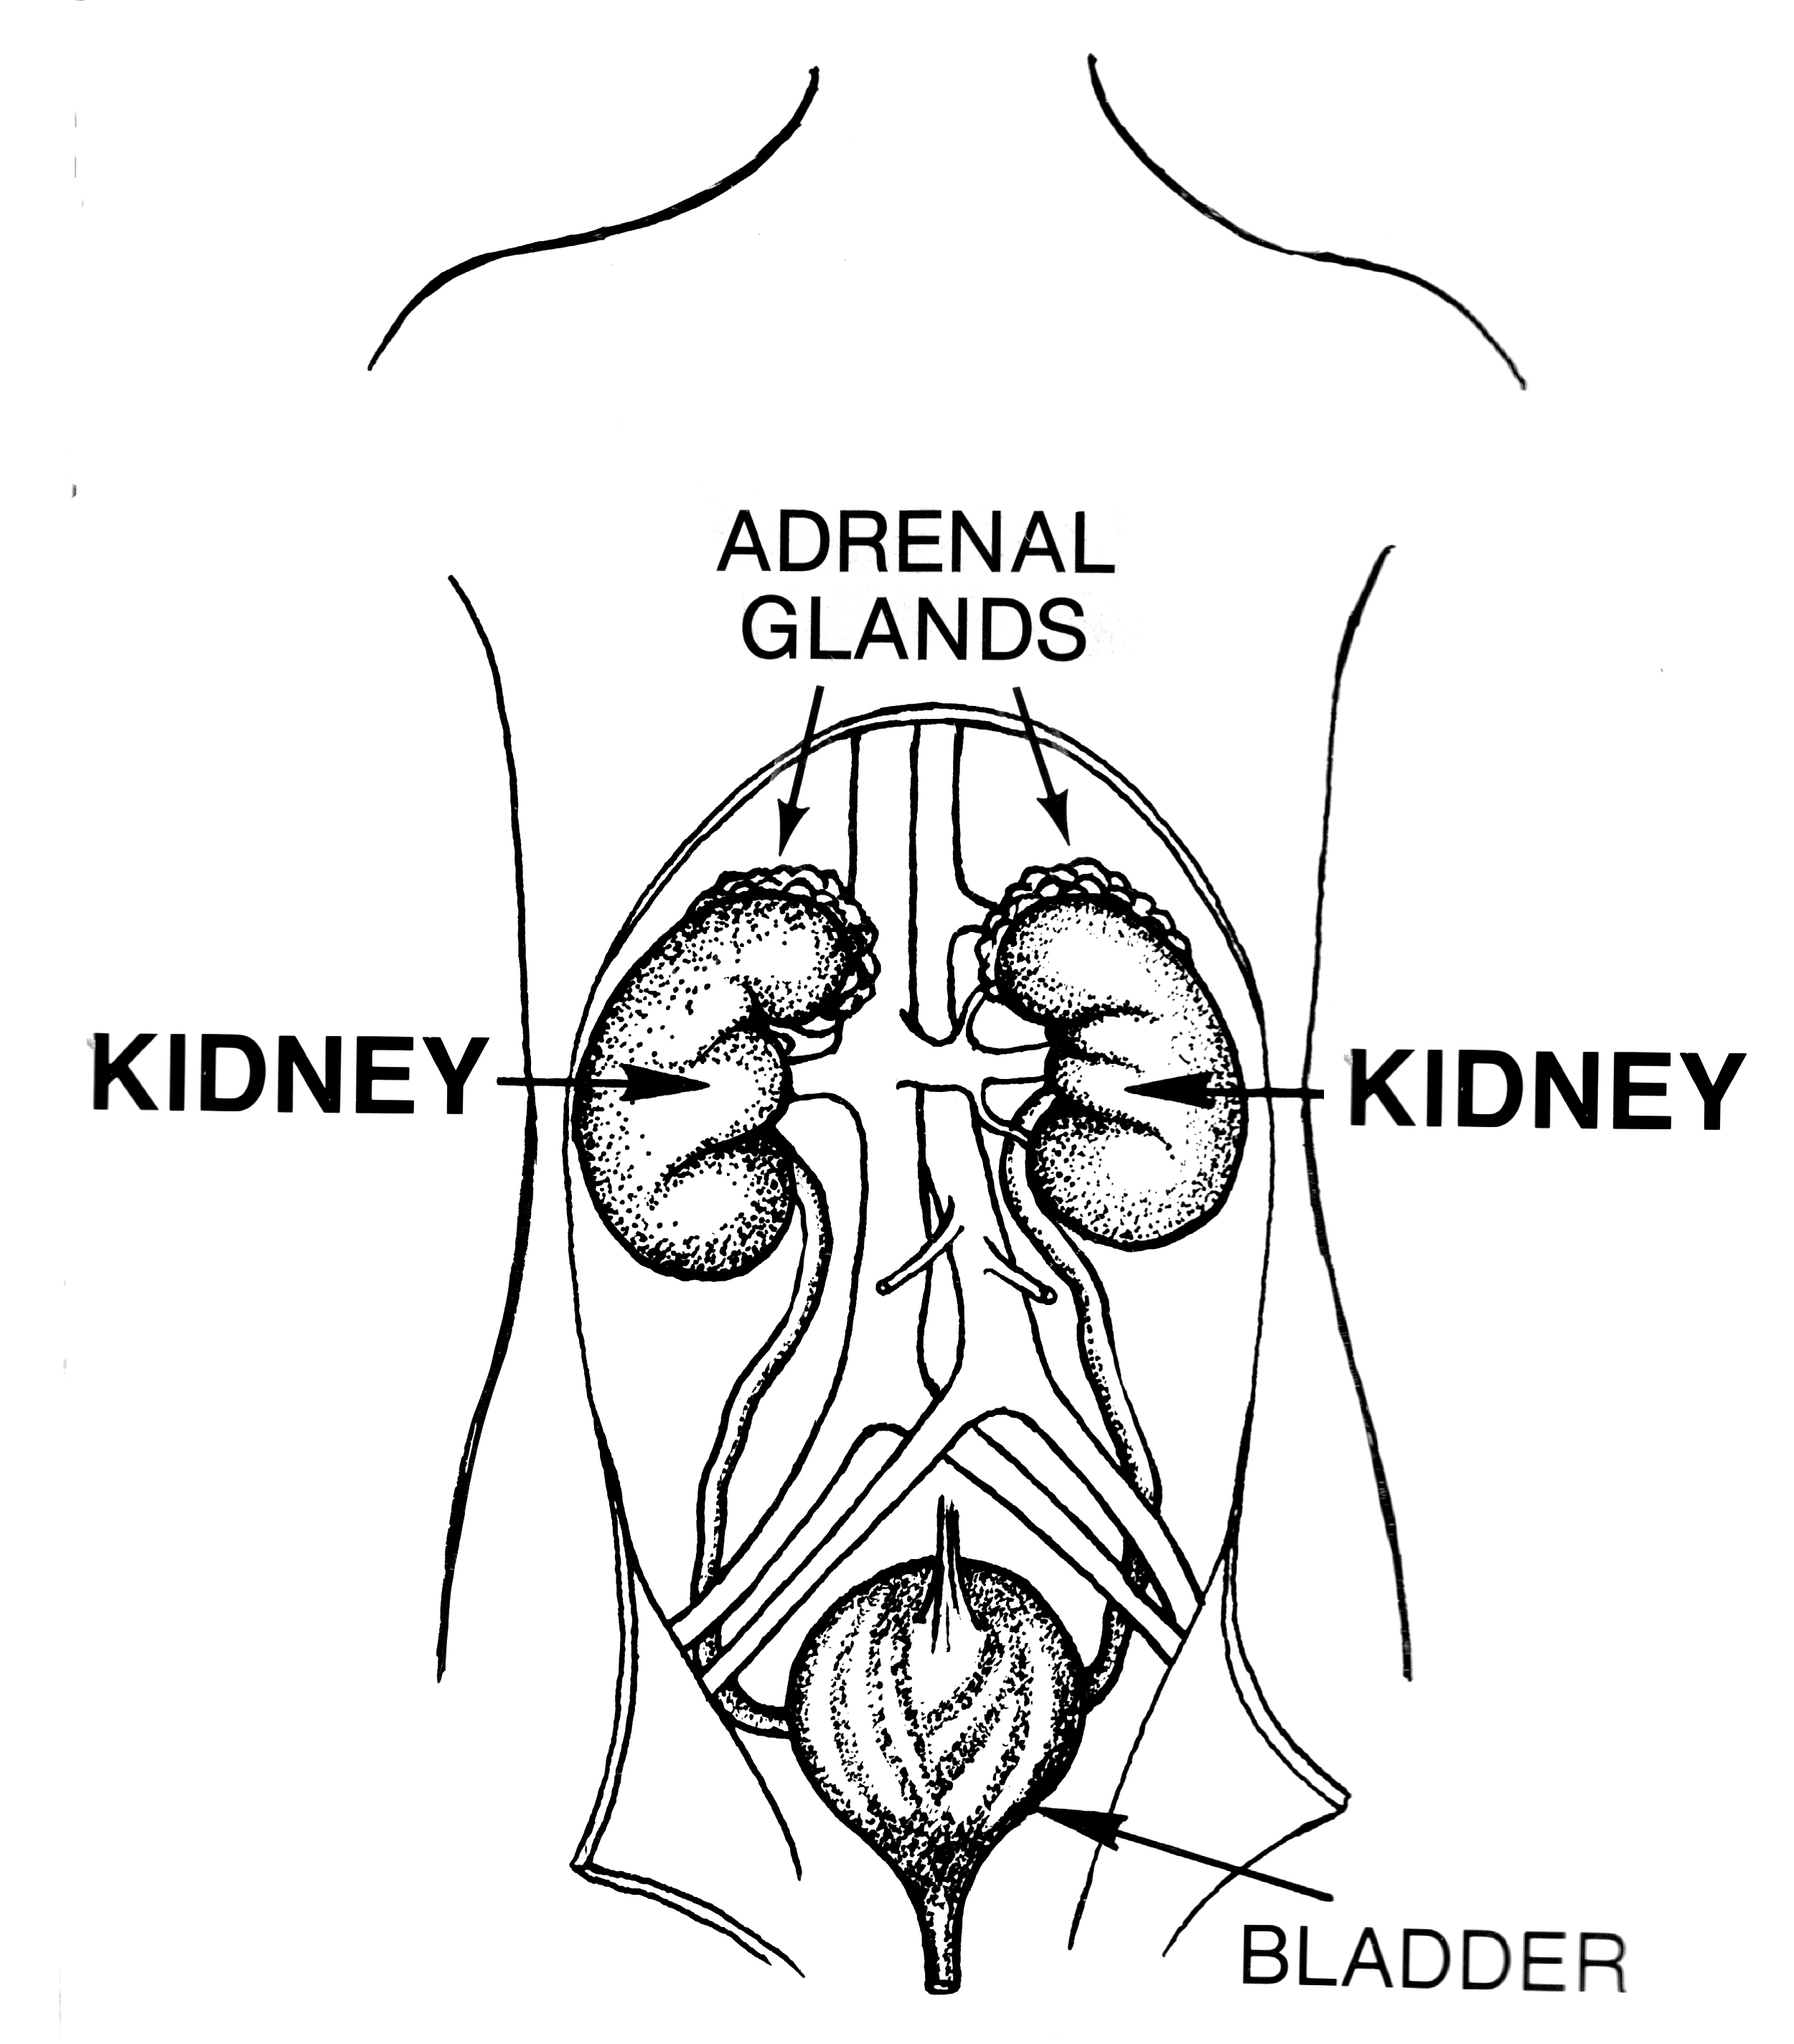 adrenal gland producing too much cortisol